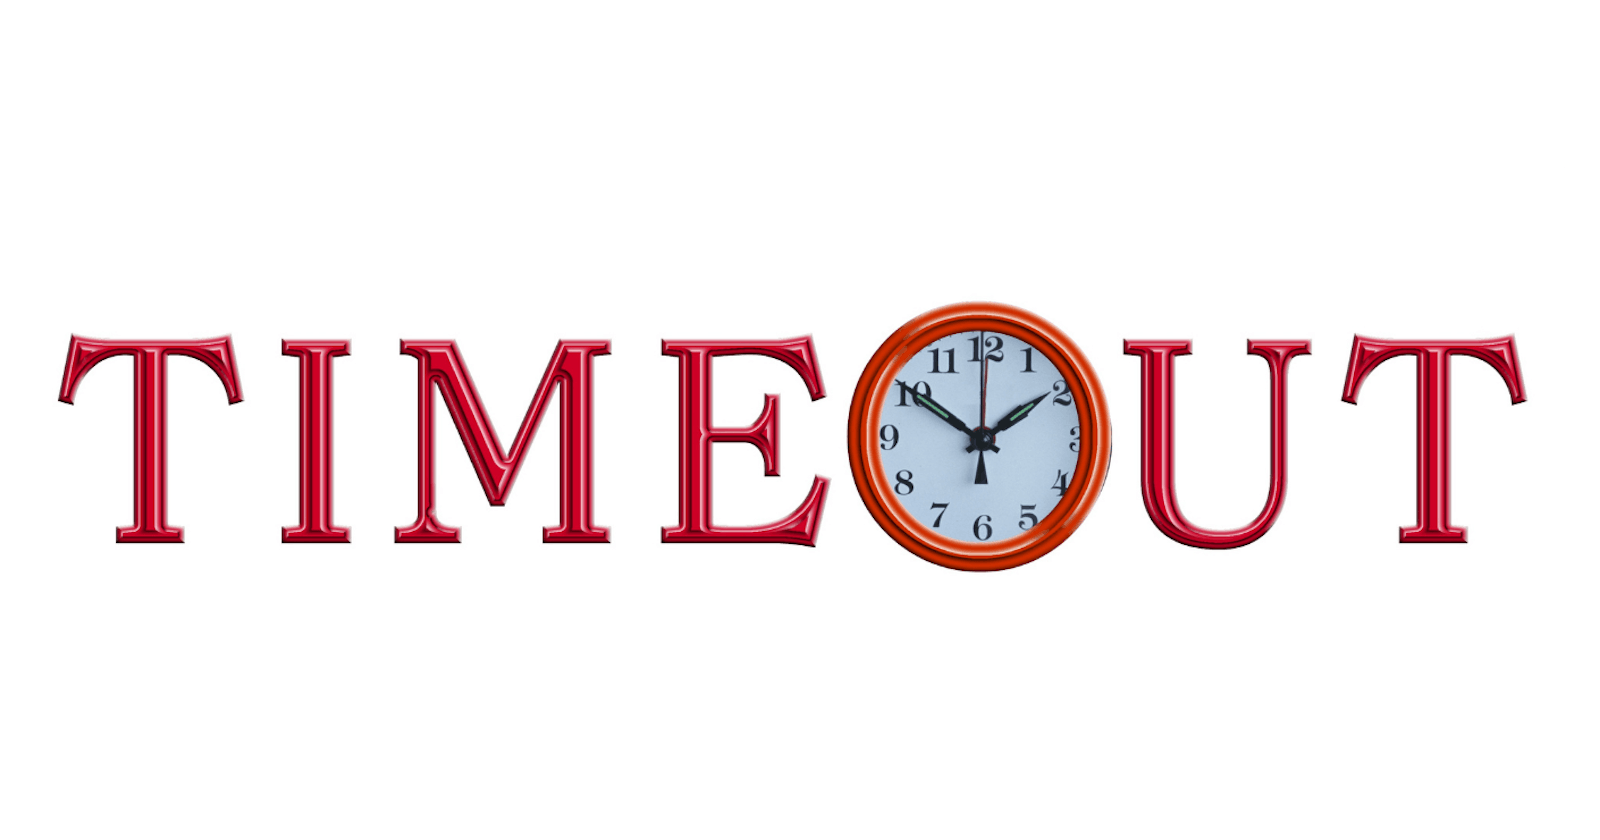 All about setTimeout() in java script